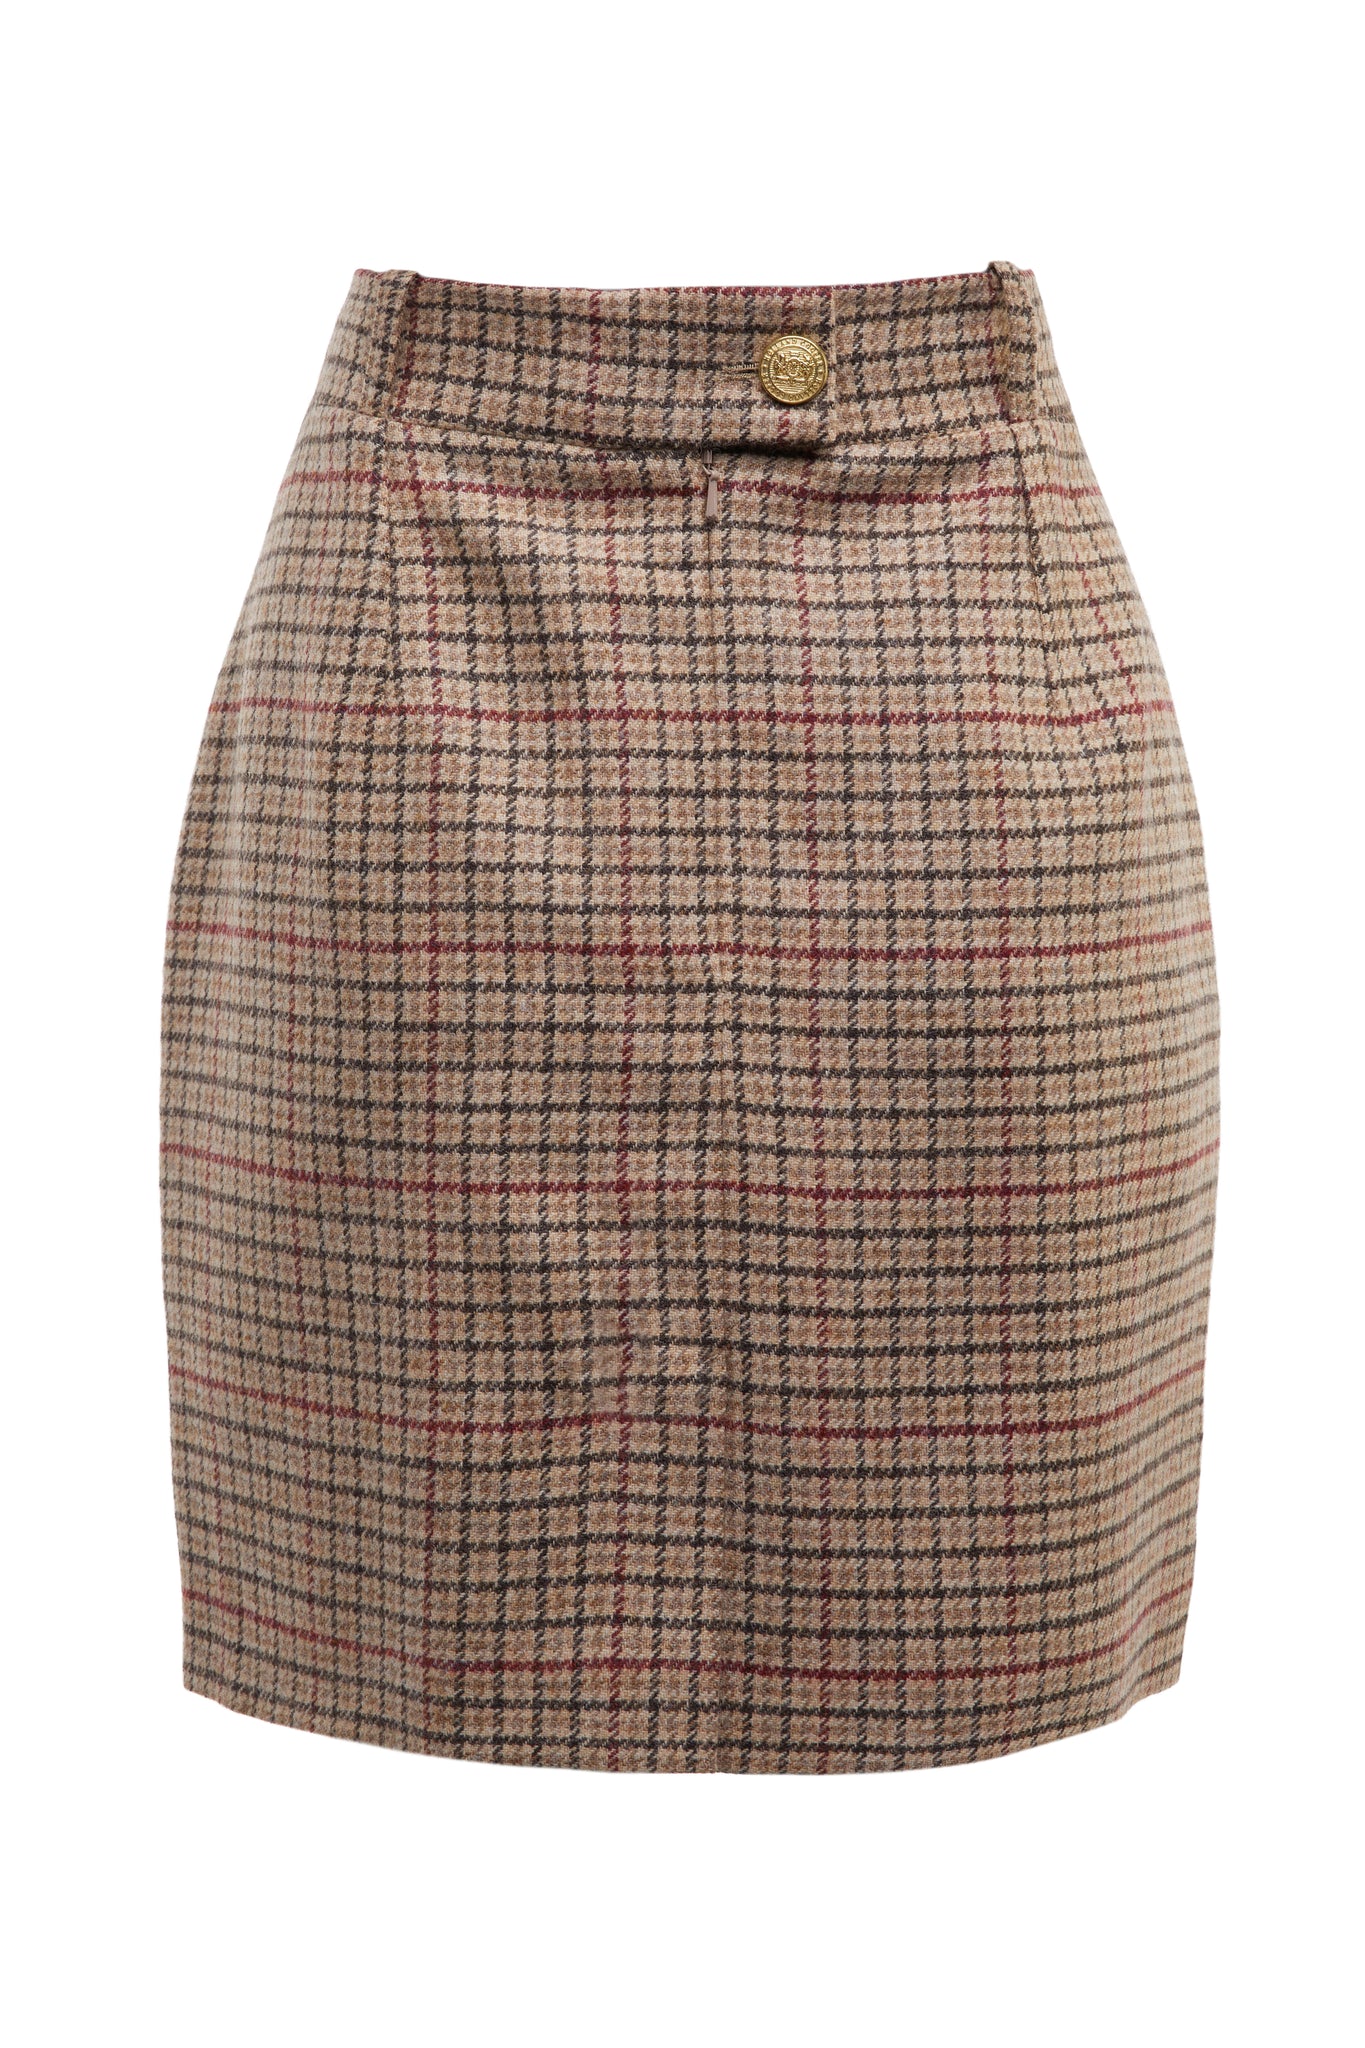 back of womens light brown and red tweed pencil mini skirt with concealed zip fastening on centre back with gold hc button above zip